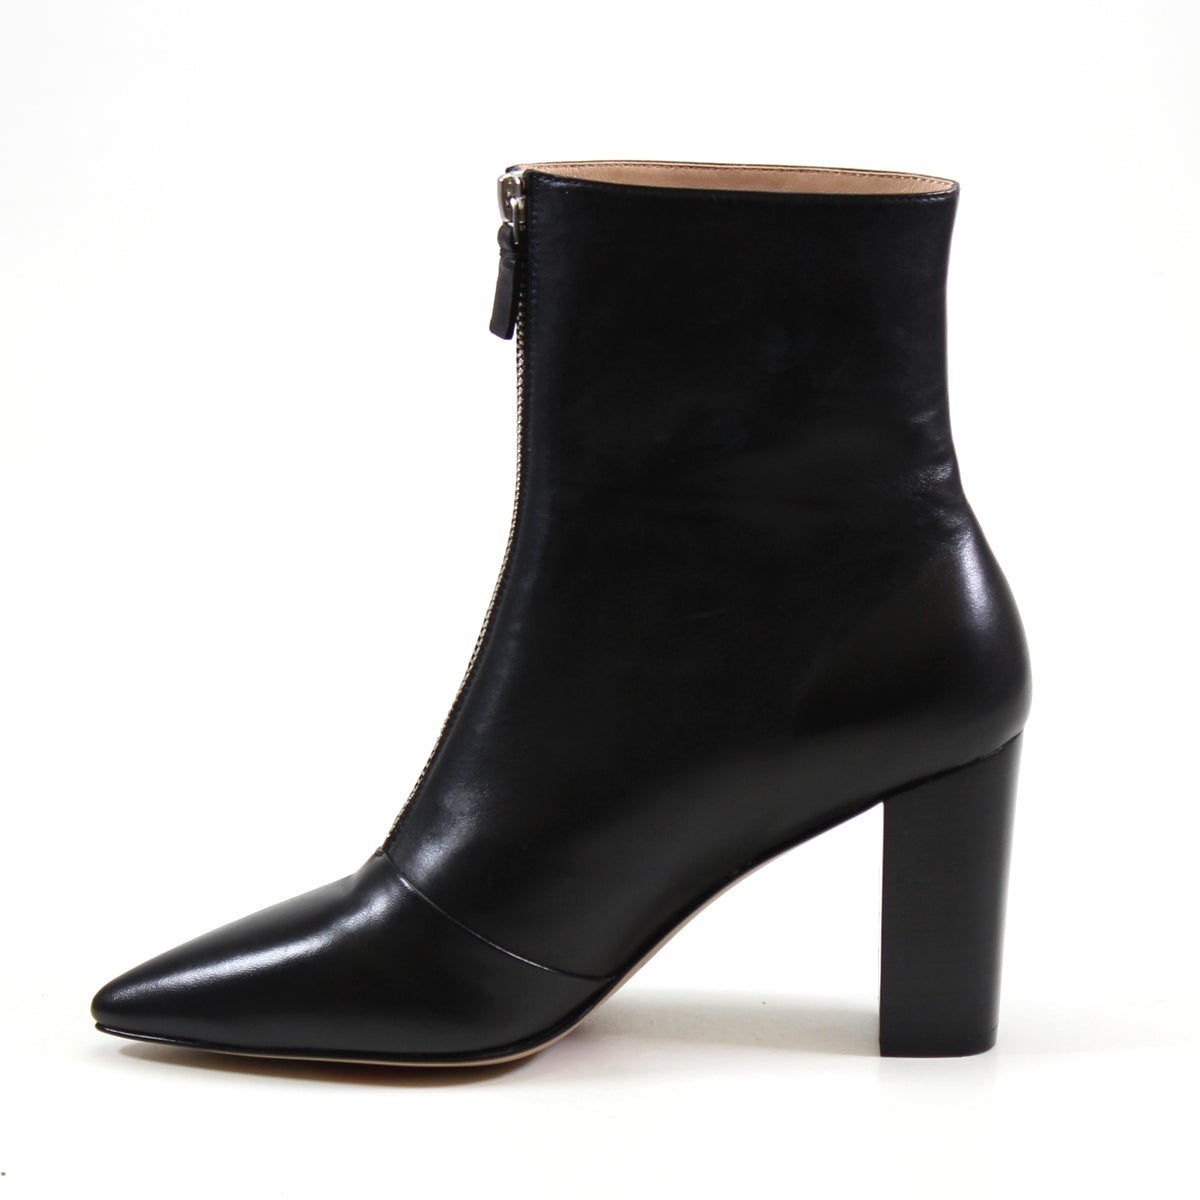  Luichiny LTD THRILL HILL in Black - Diba Shoes